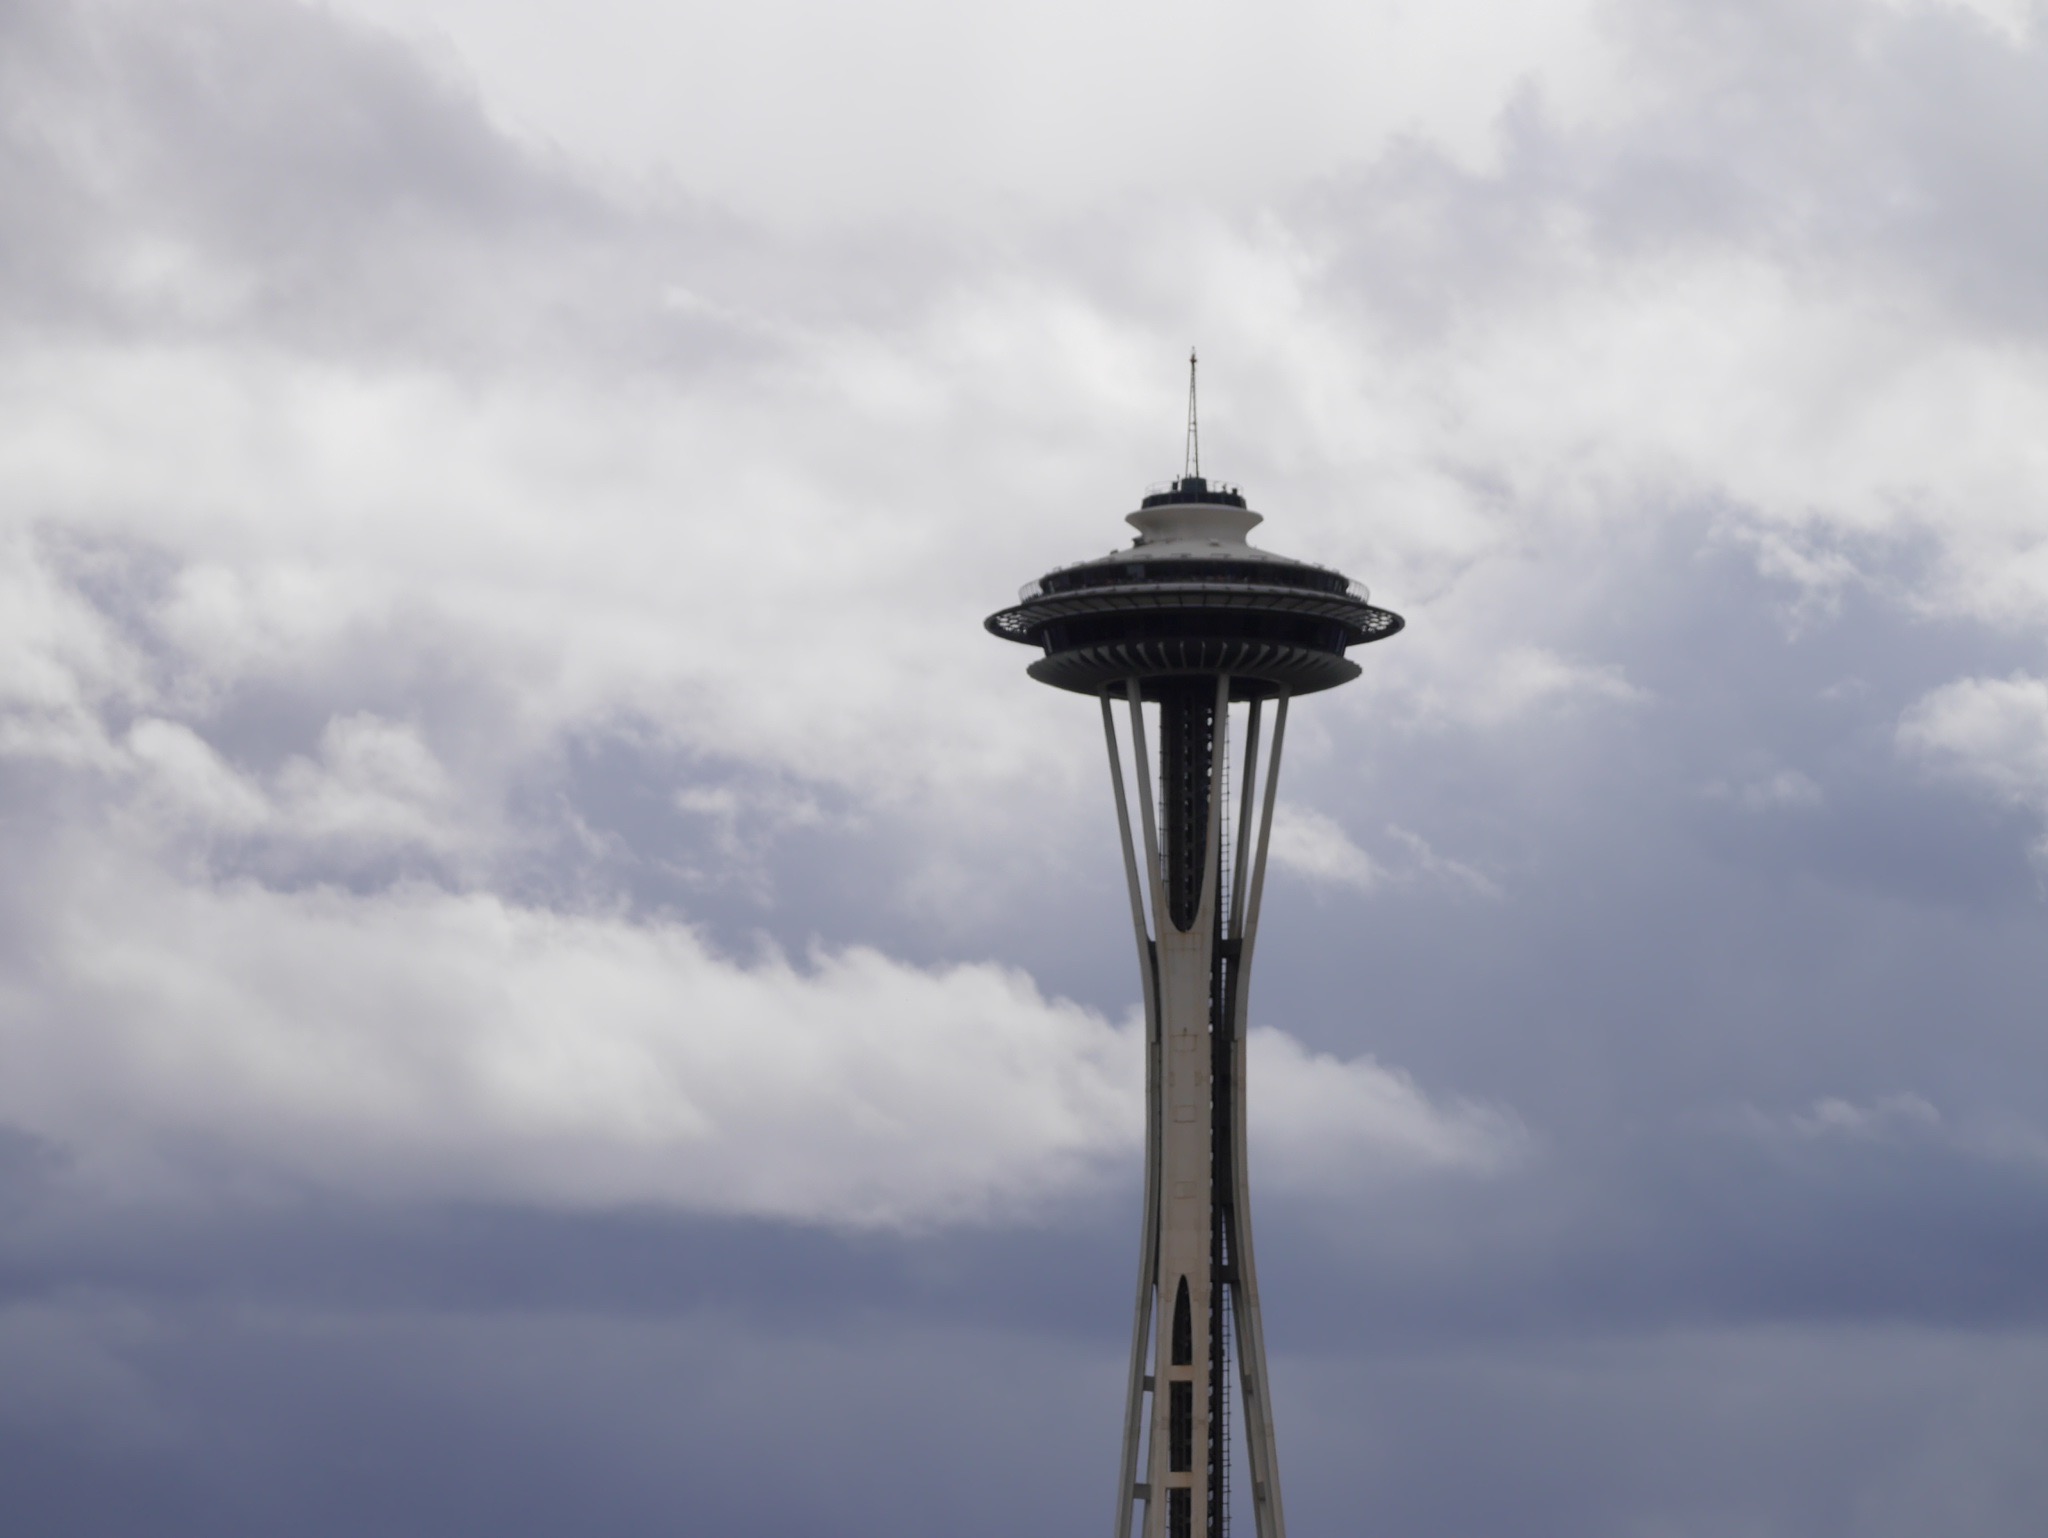 Seattle's Space Needle hovering under the clouds. (photo by Cat Stelzer)